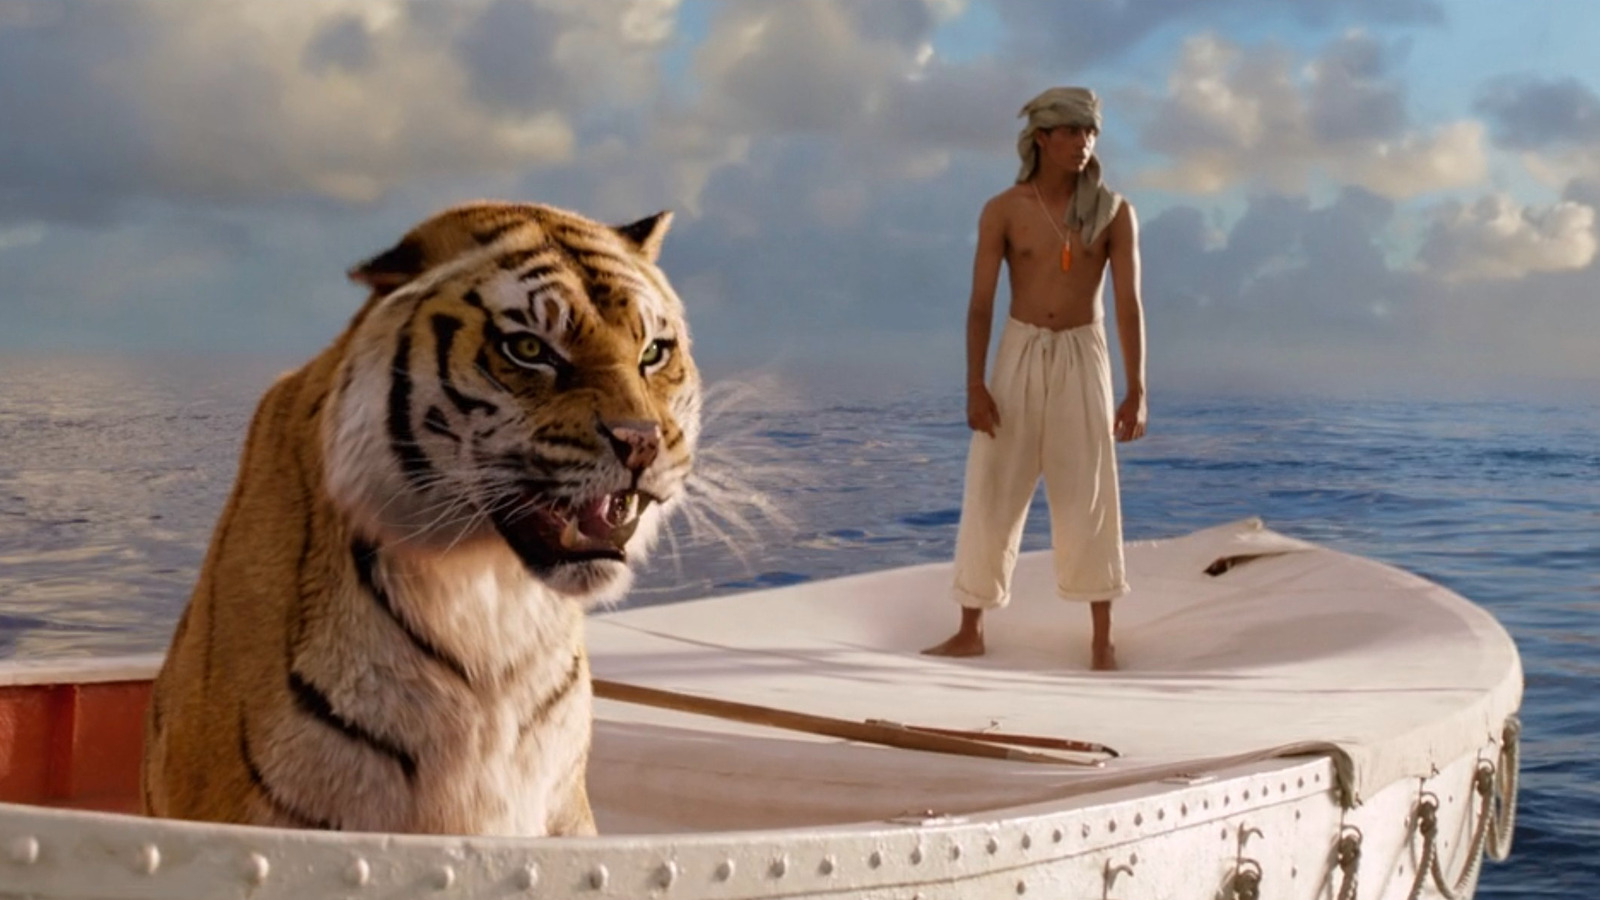 Life Of Pi Ending Explained: Which Is The Better Story?